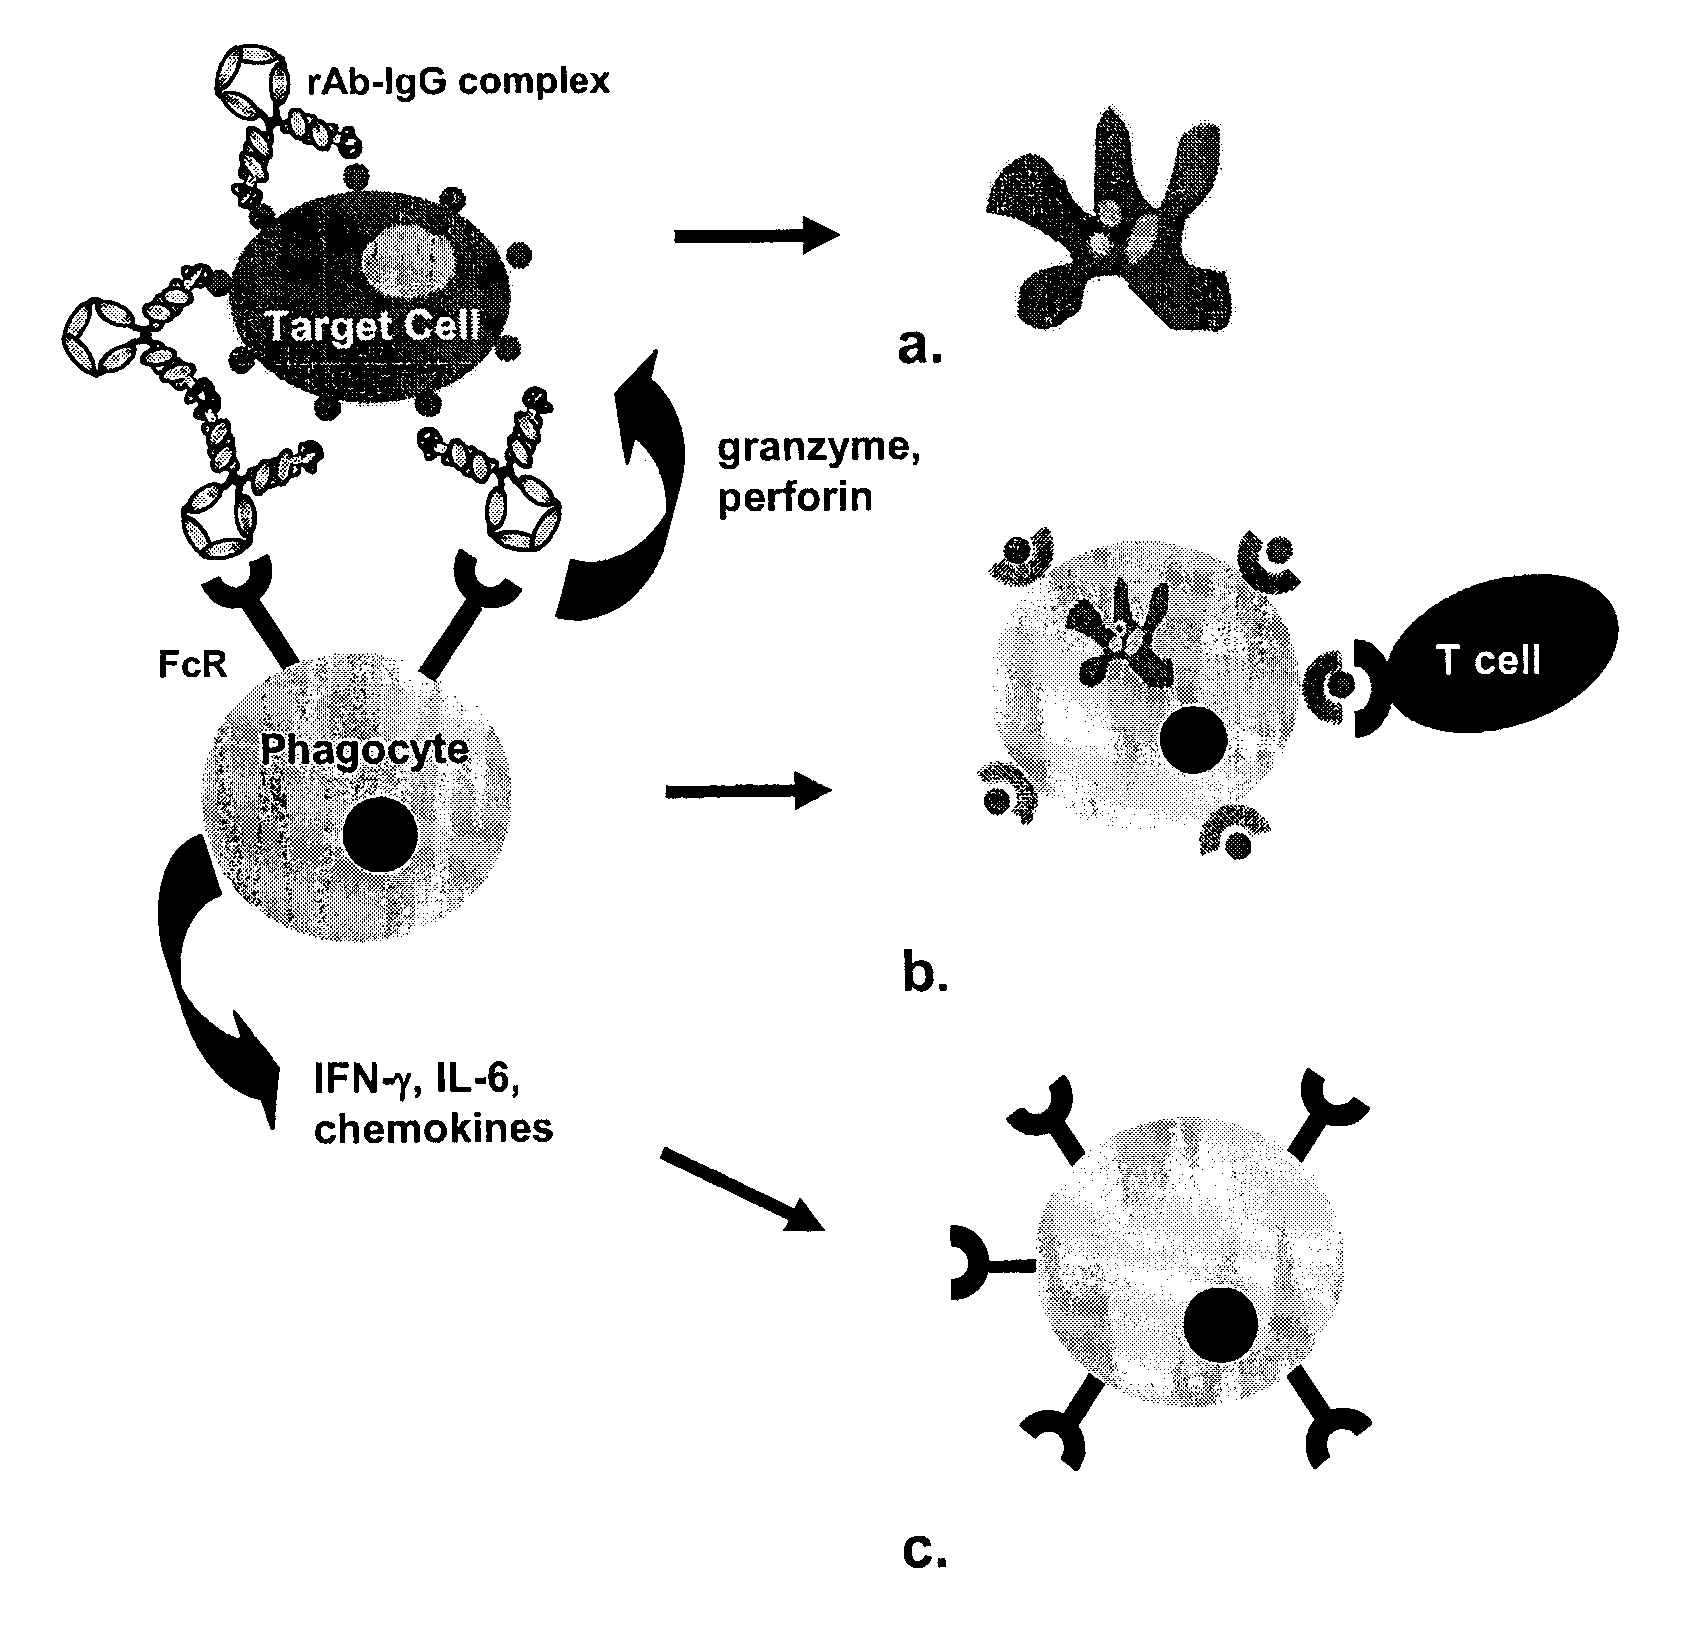 Methods of improving the therapeutic efficacy and utility of antibody fragments